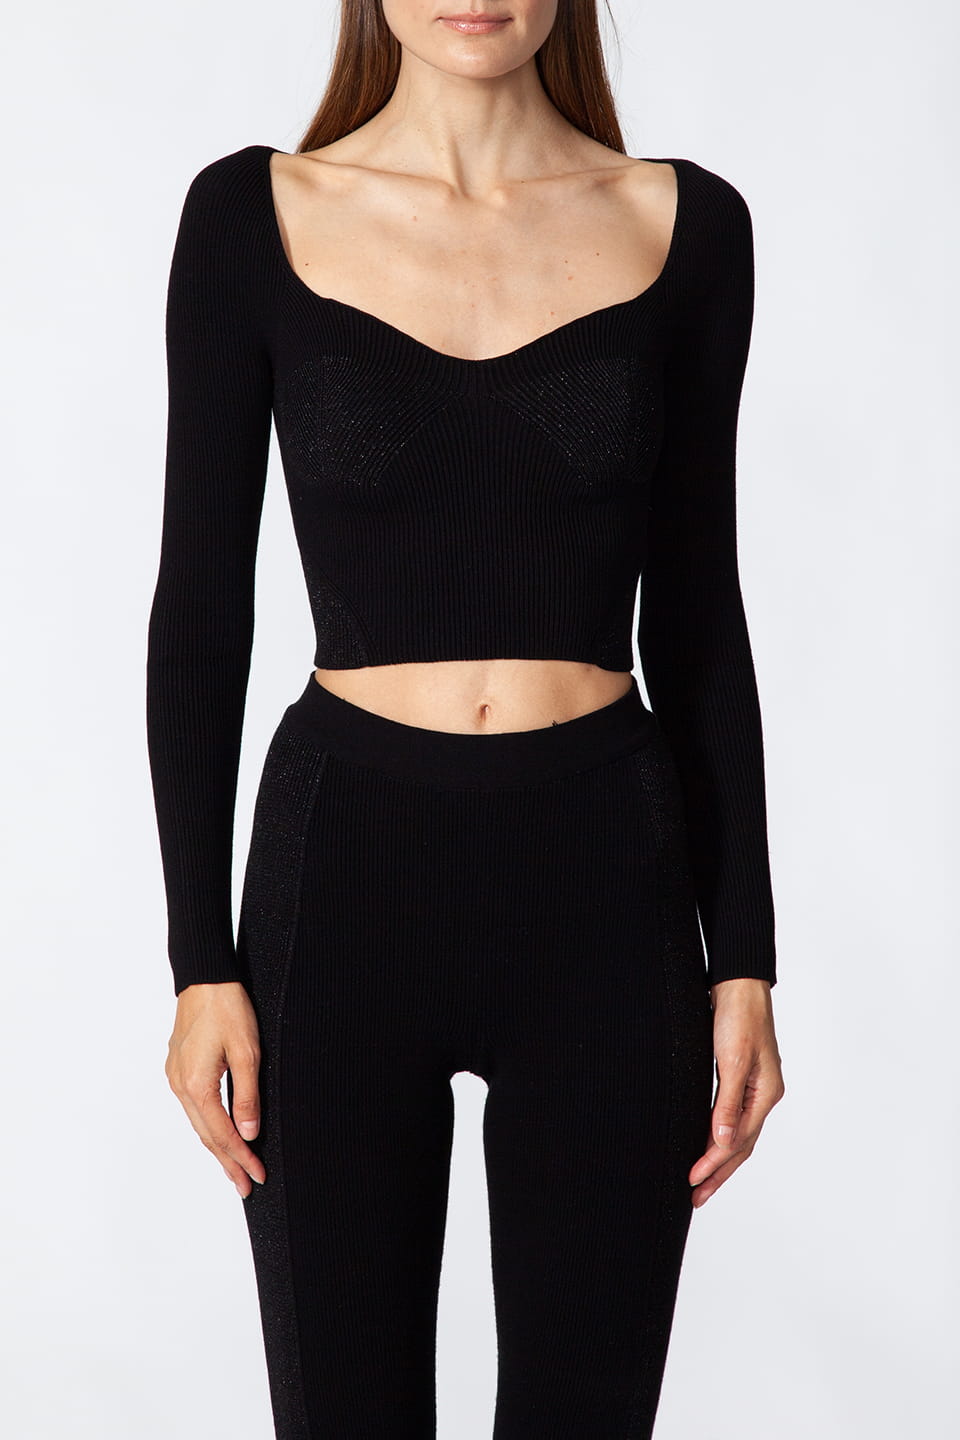 Model posing for front view, wearing stylist Kukhareva London's trendy black top, with cut out neckline and inserts threaded with metallic, shimmering yarn.